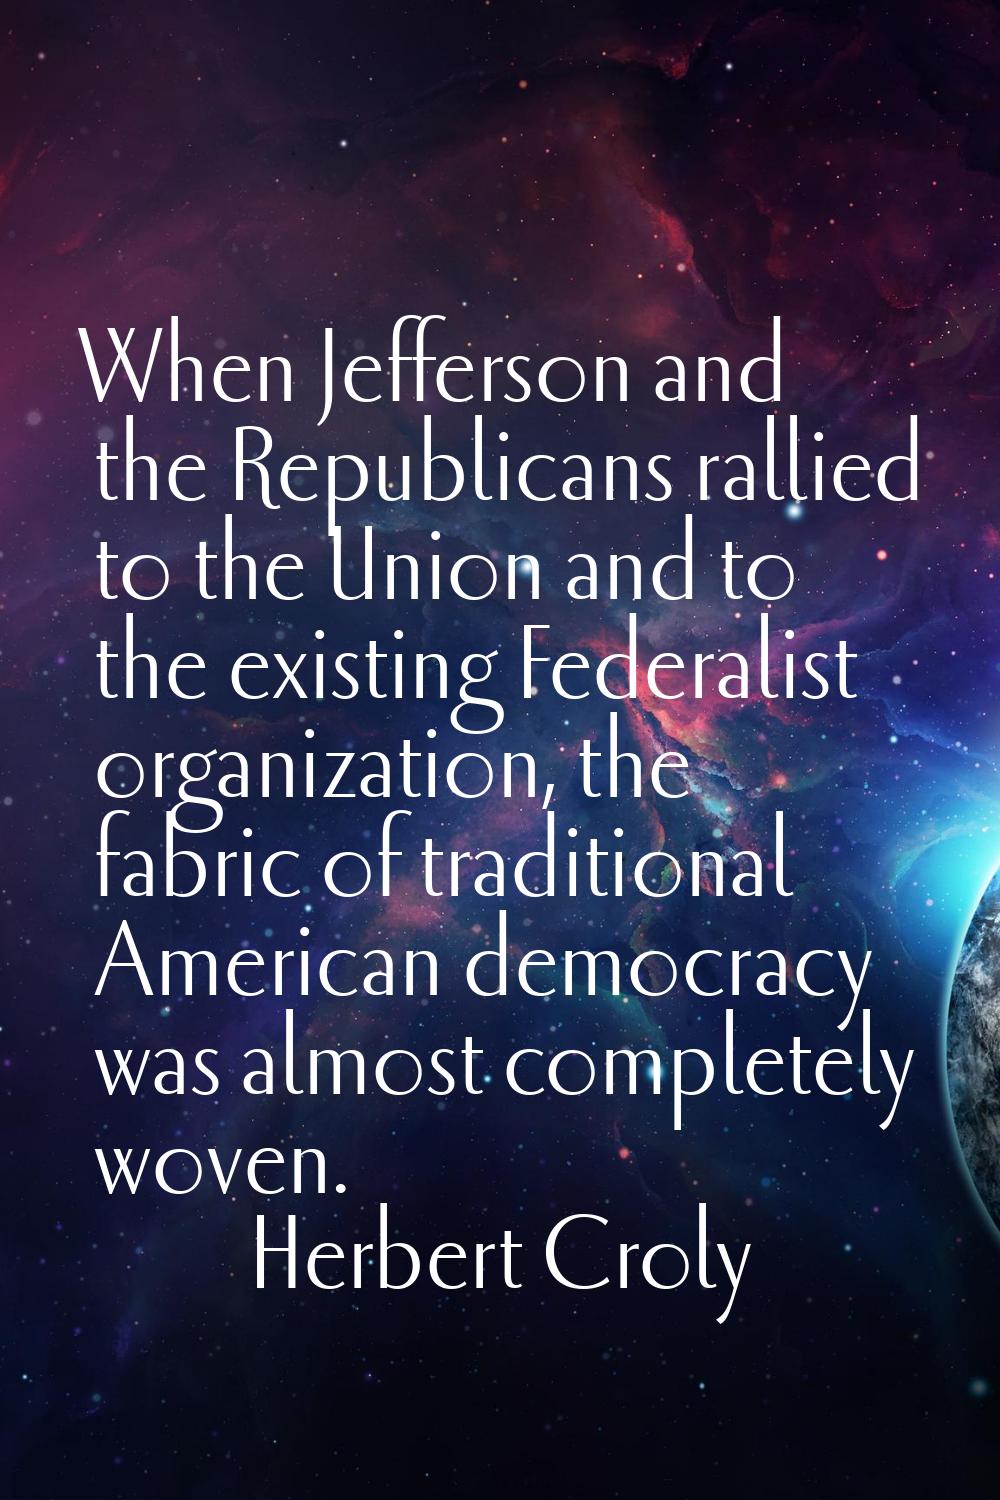 When Jefferson and the Republicans rallied to the Union and to the existing Federalist organization